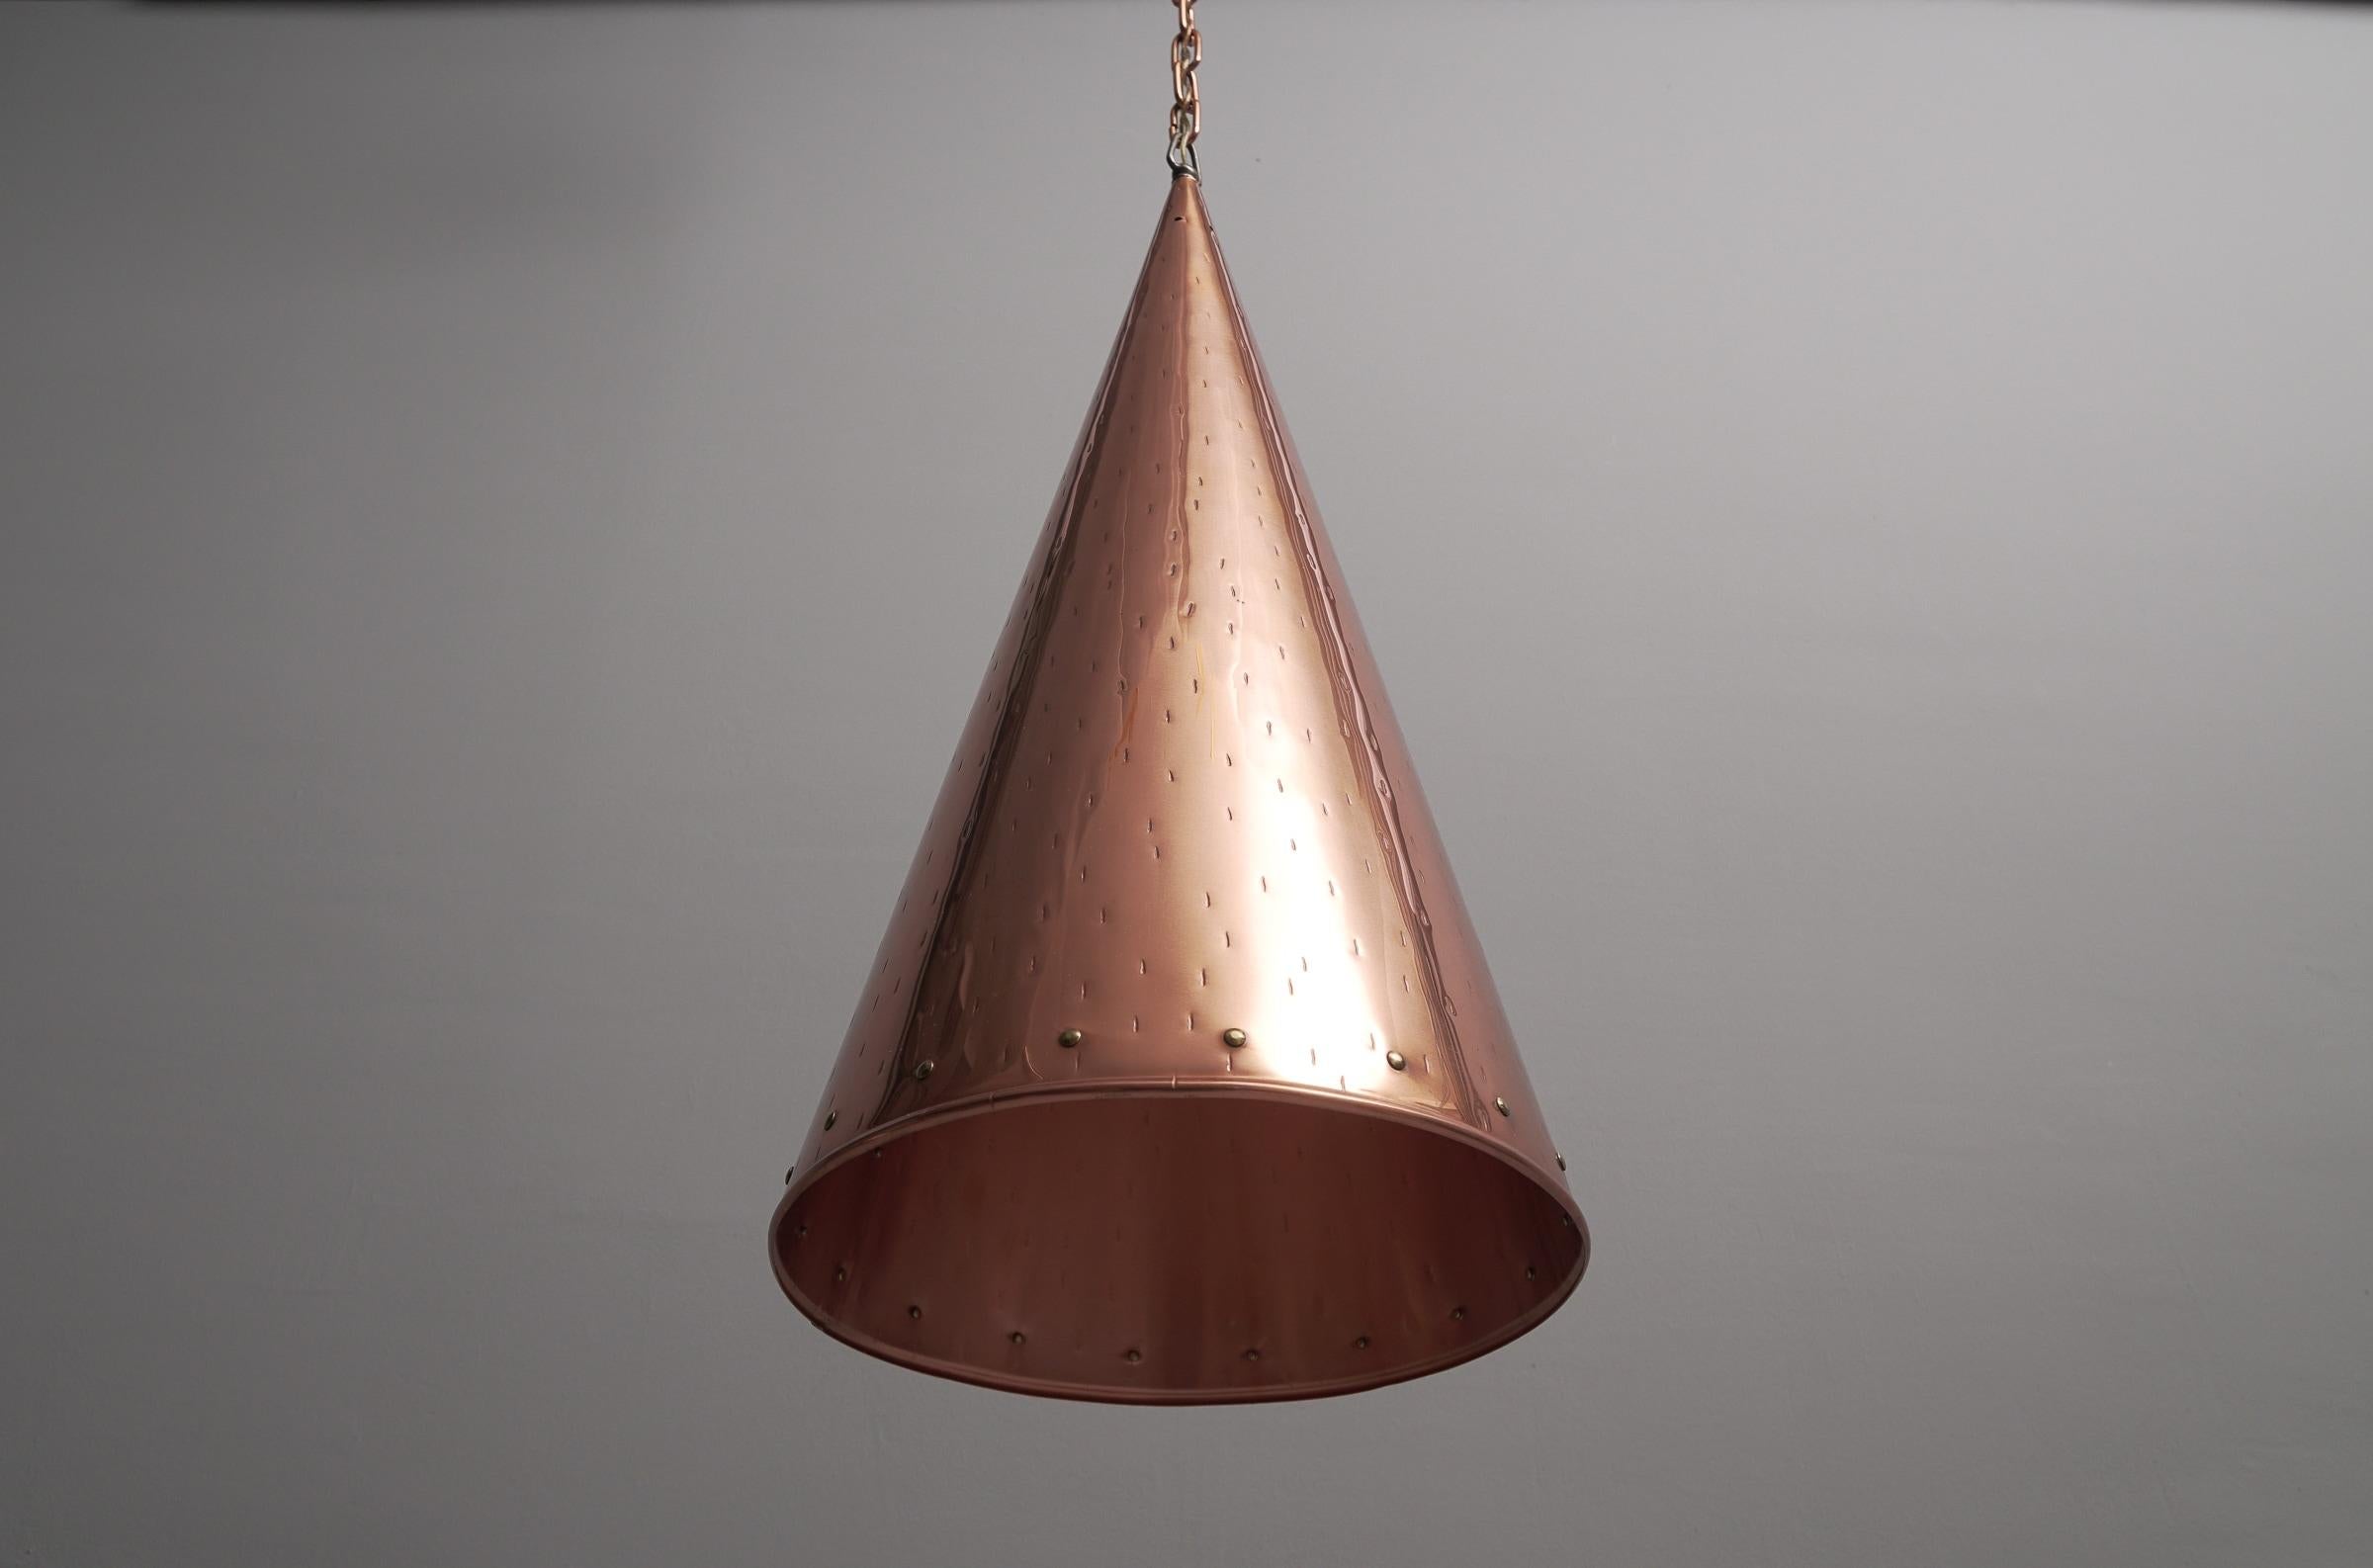 Hammered Copper Cone Pendant Lamps by E.S Horn Aalestrup, 1950s Denmark For Sale 3